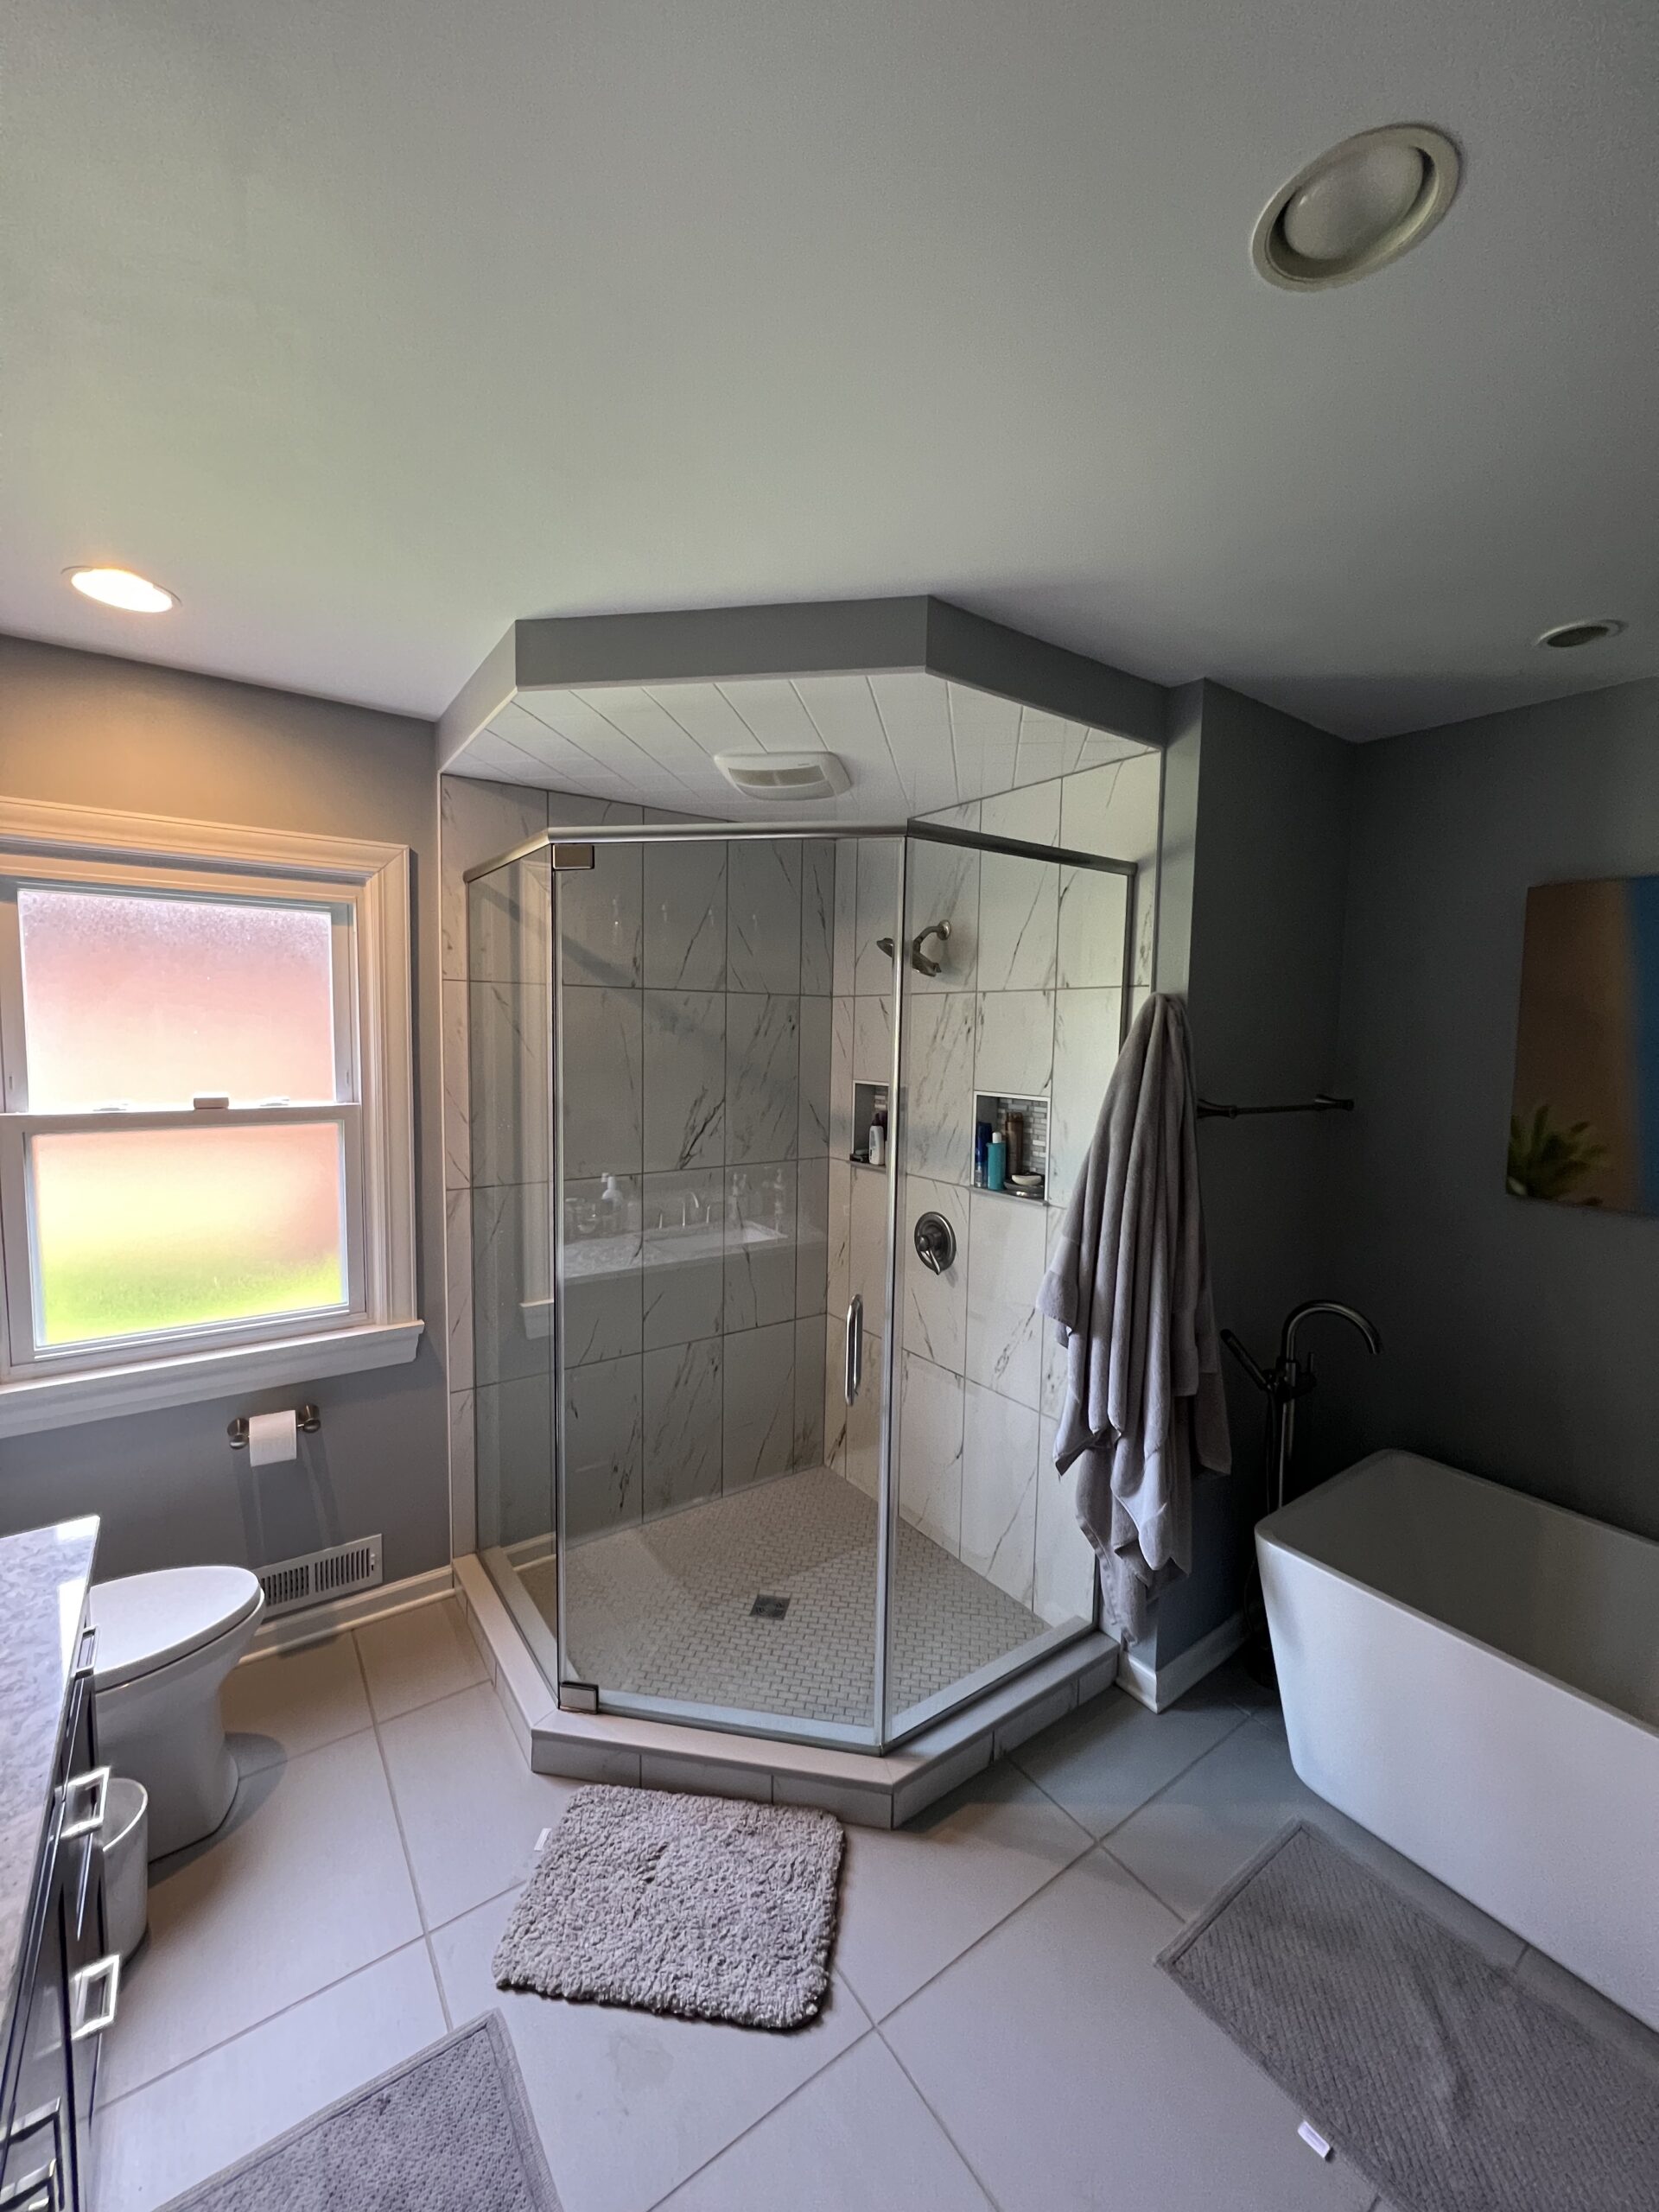 Contemporary bathroom, big shower with large light colored marble tiles, white soaking tub, blurry window